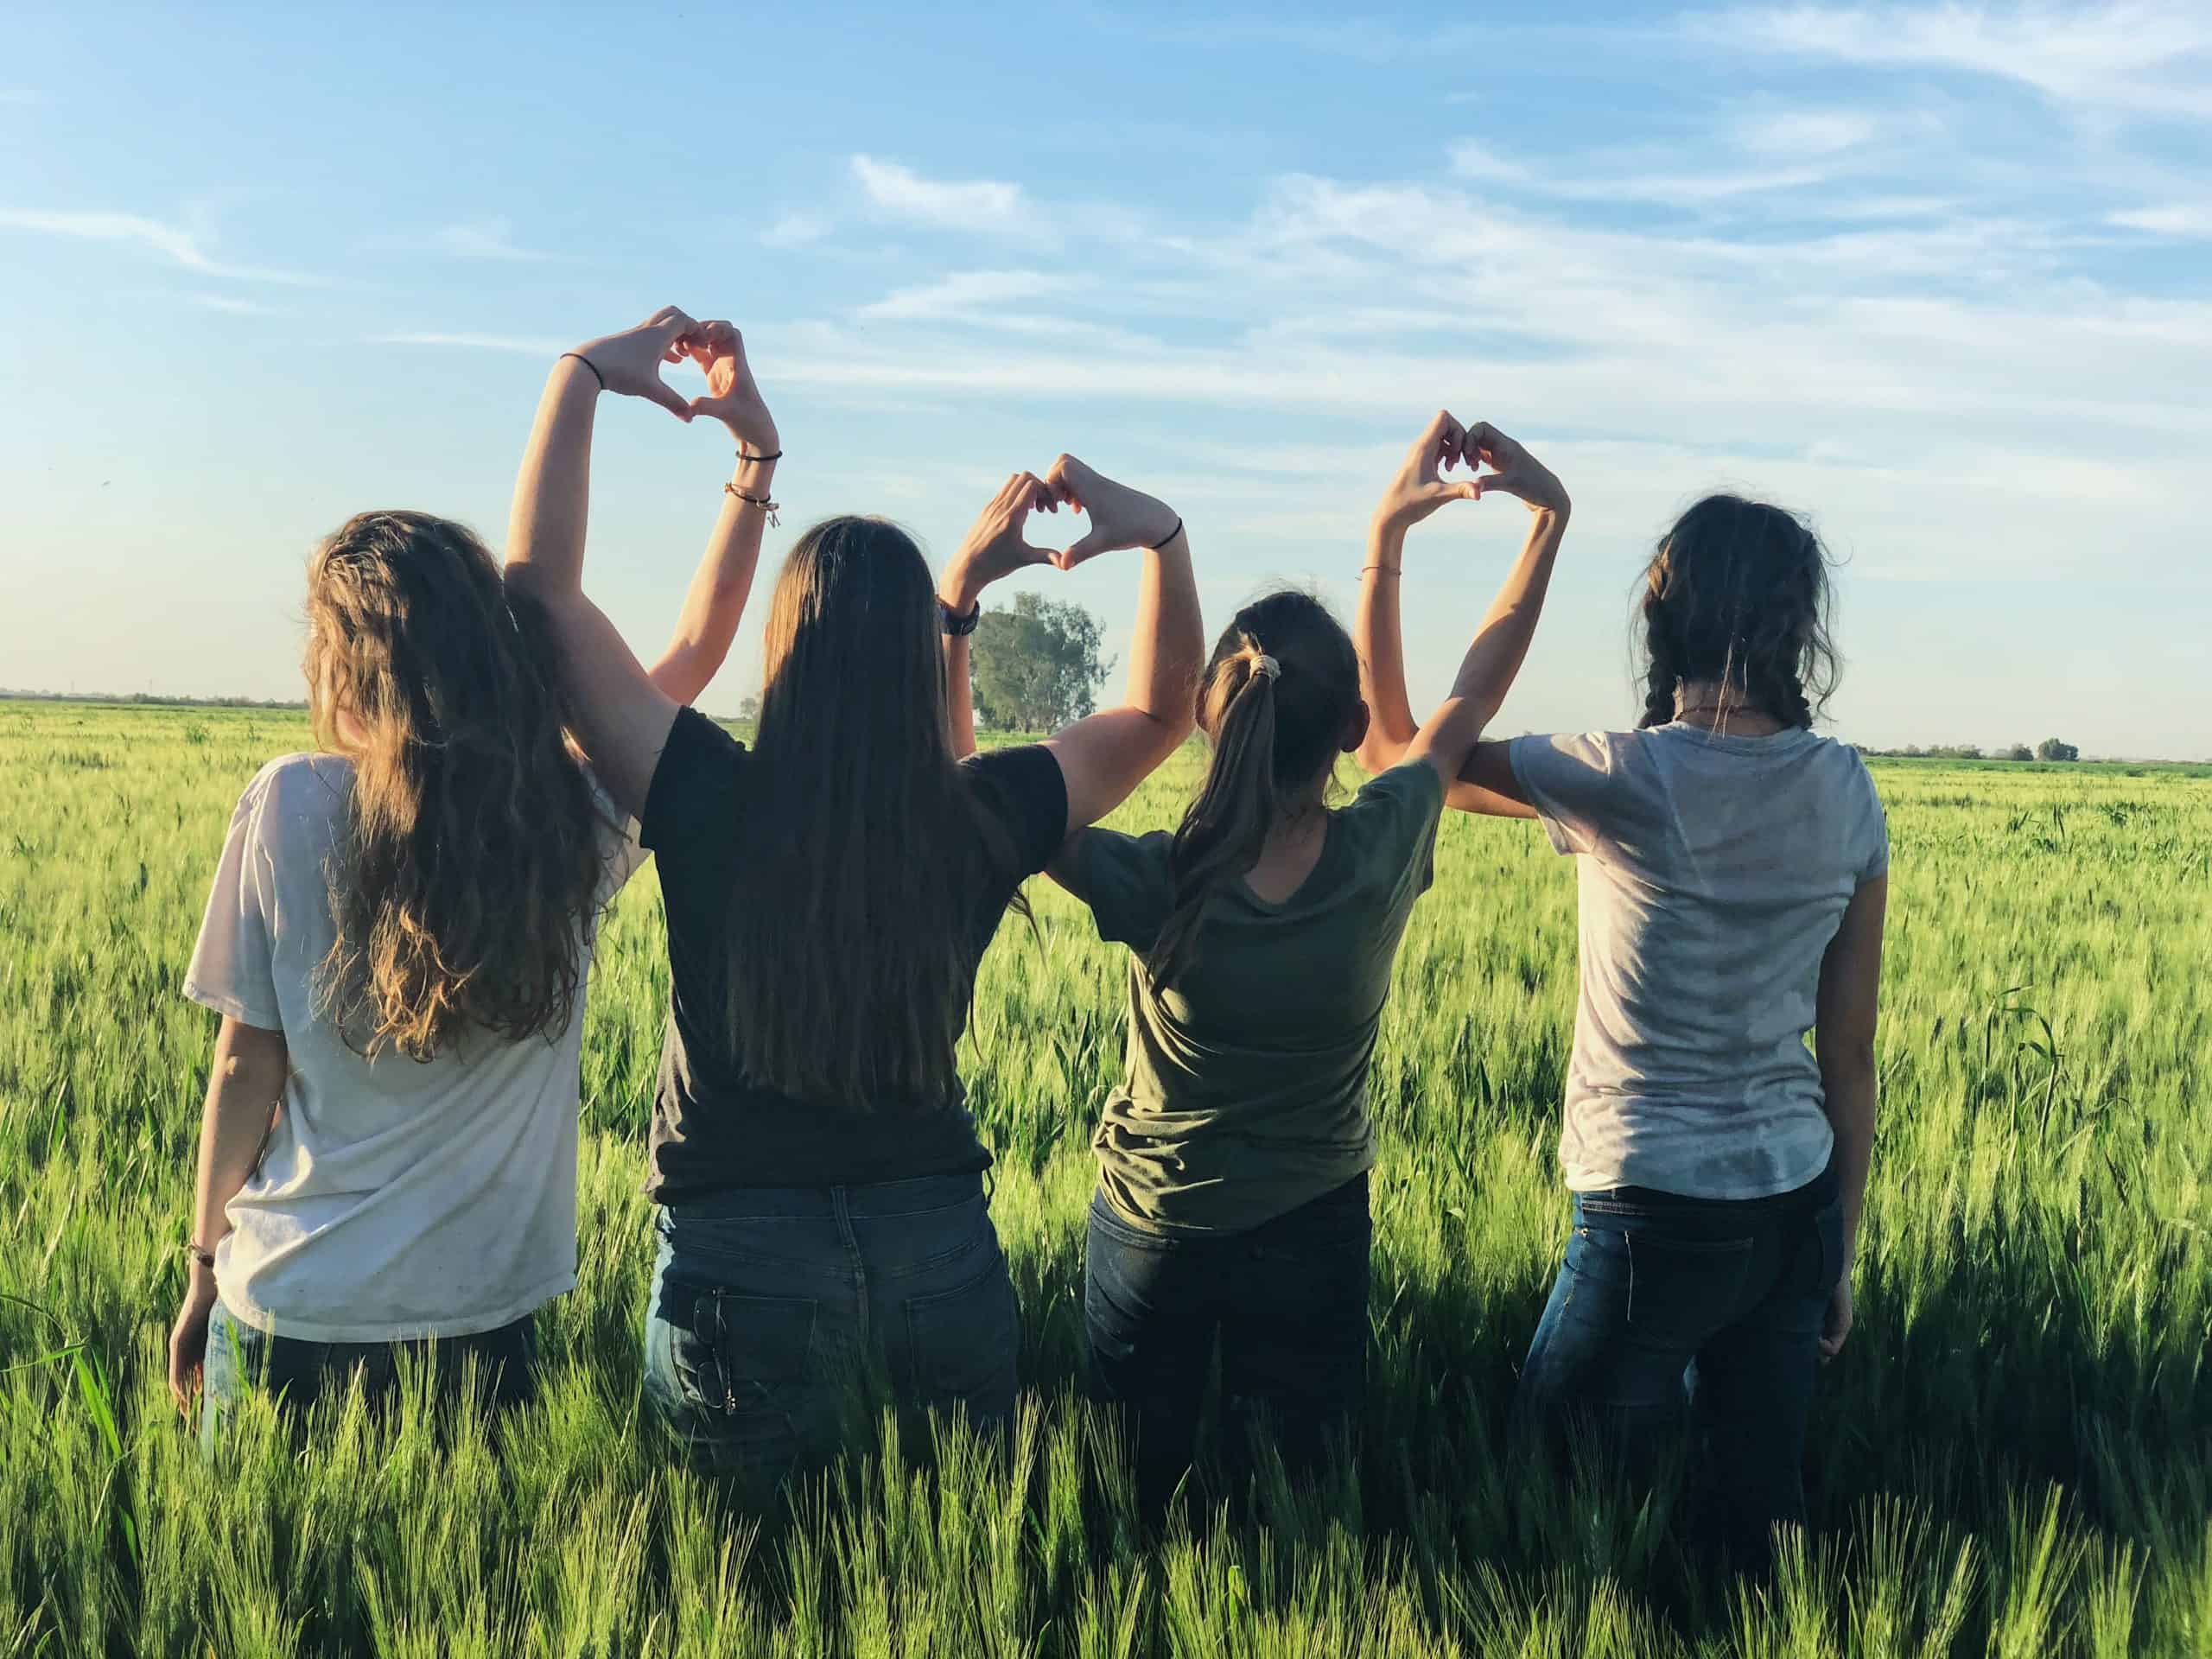 A group of women in a field forming heart shapes with their hands together